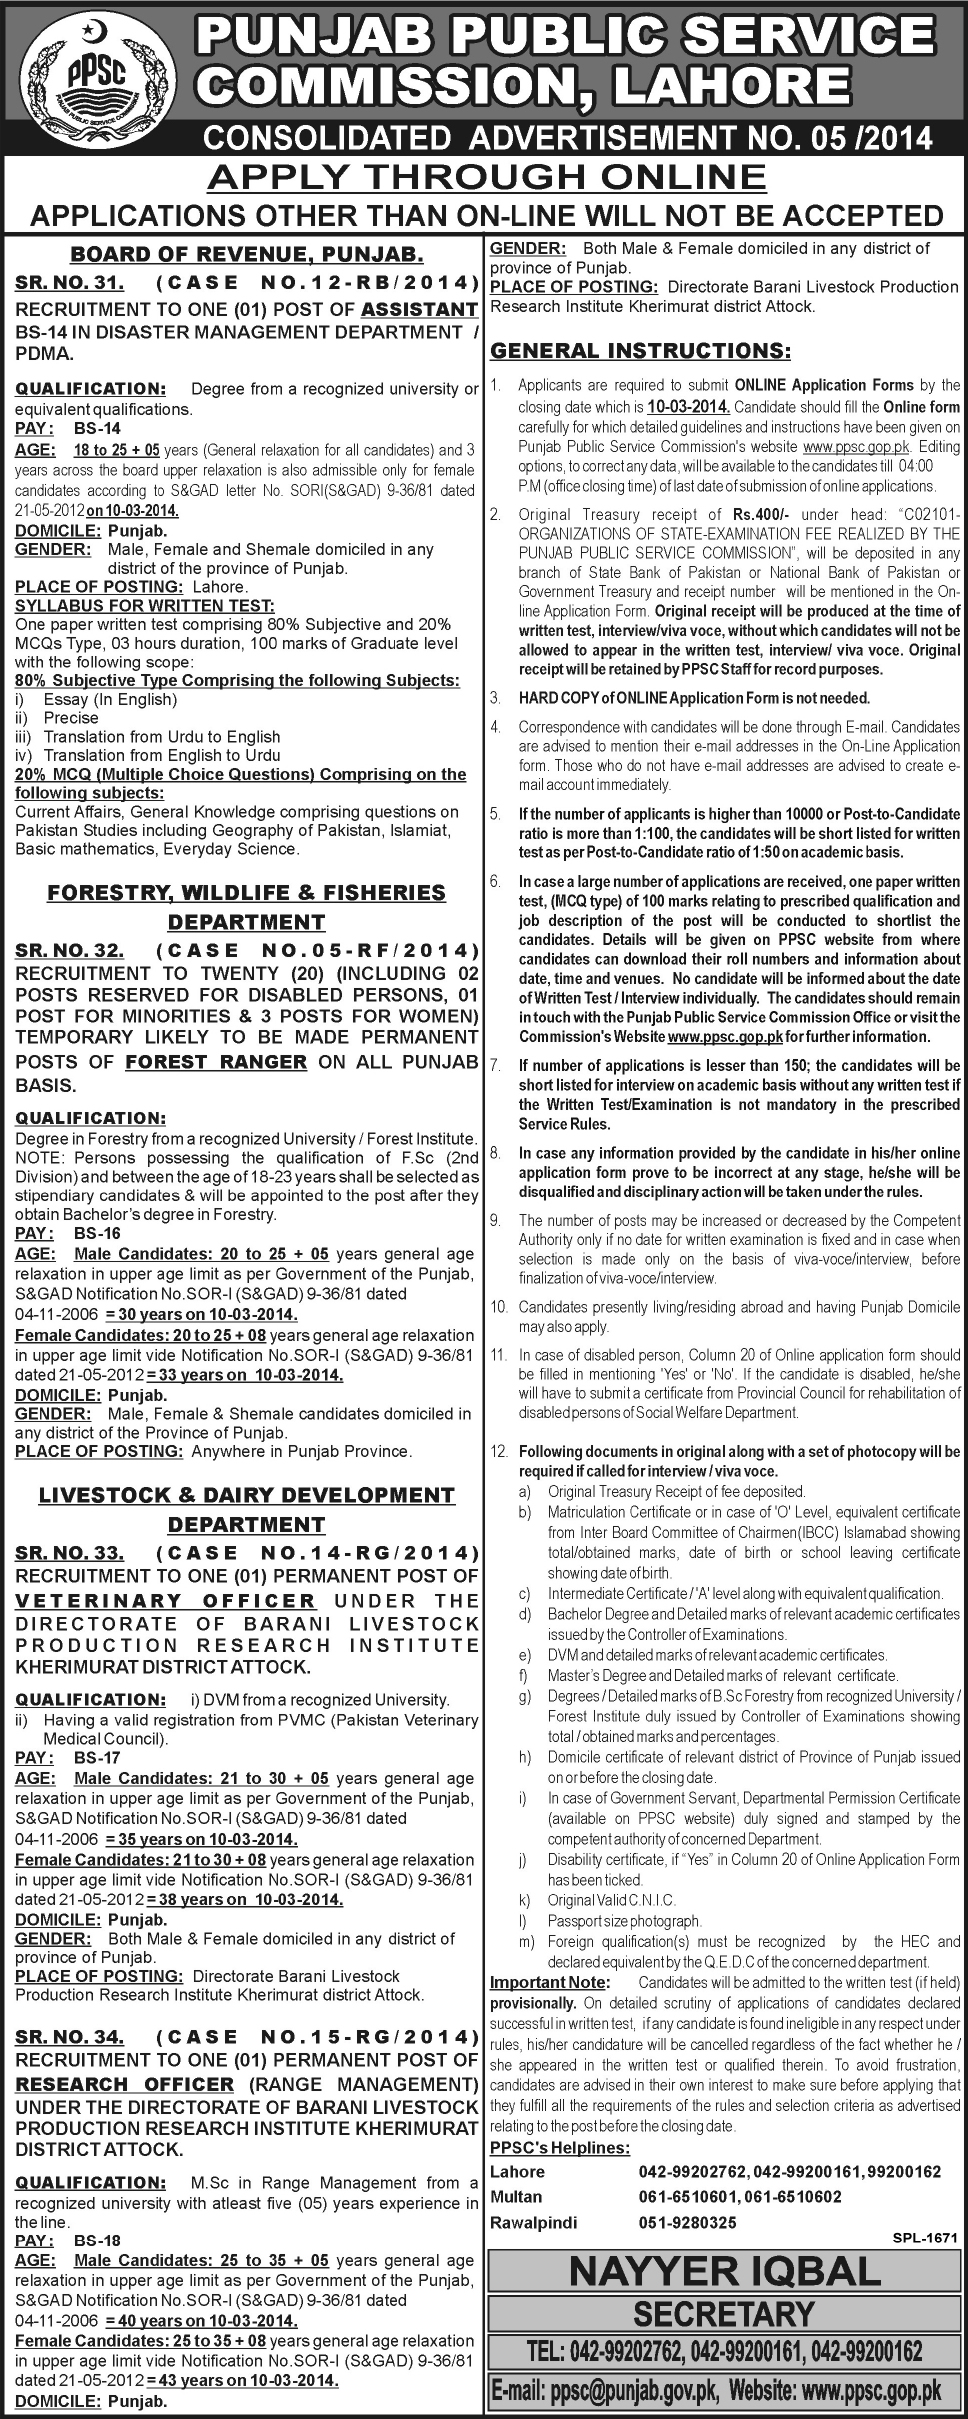 PPSC Jobs 2014 February Consolidated Ad No. 05/2014